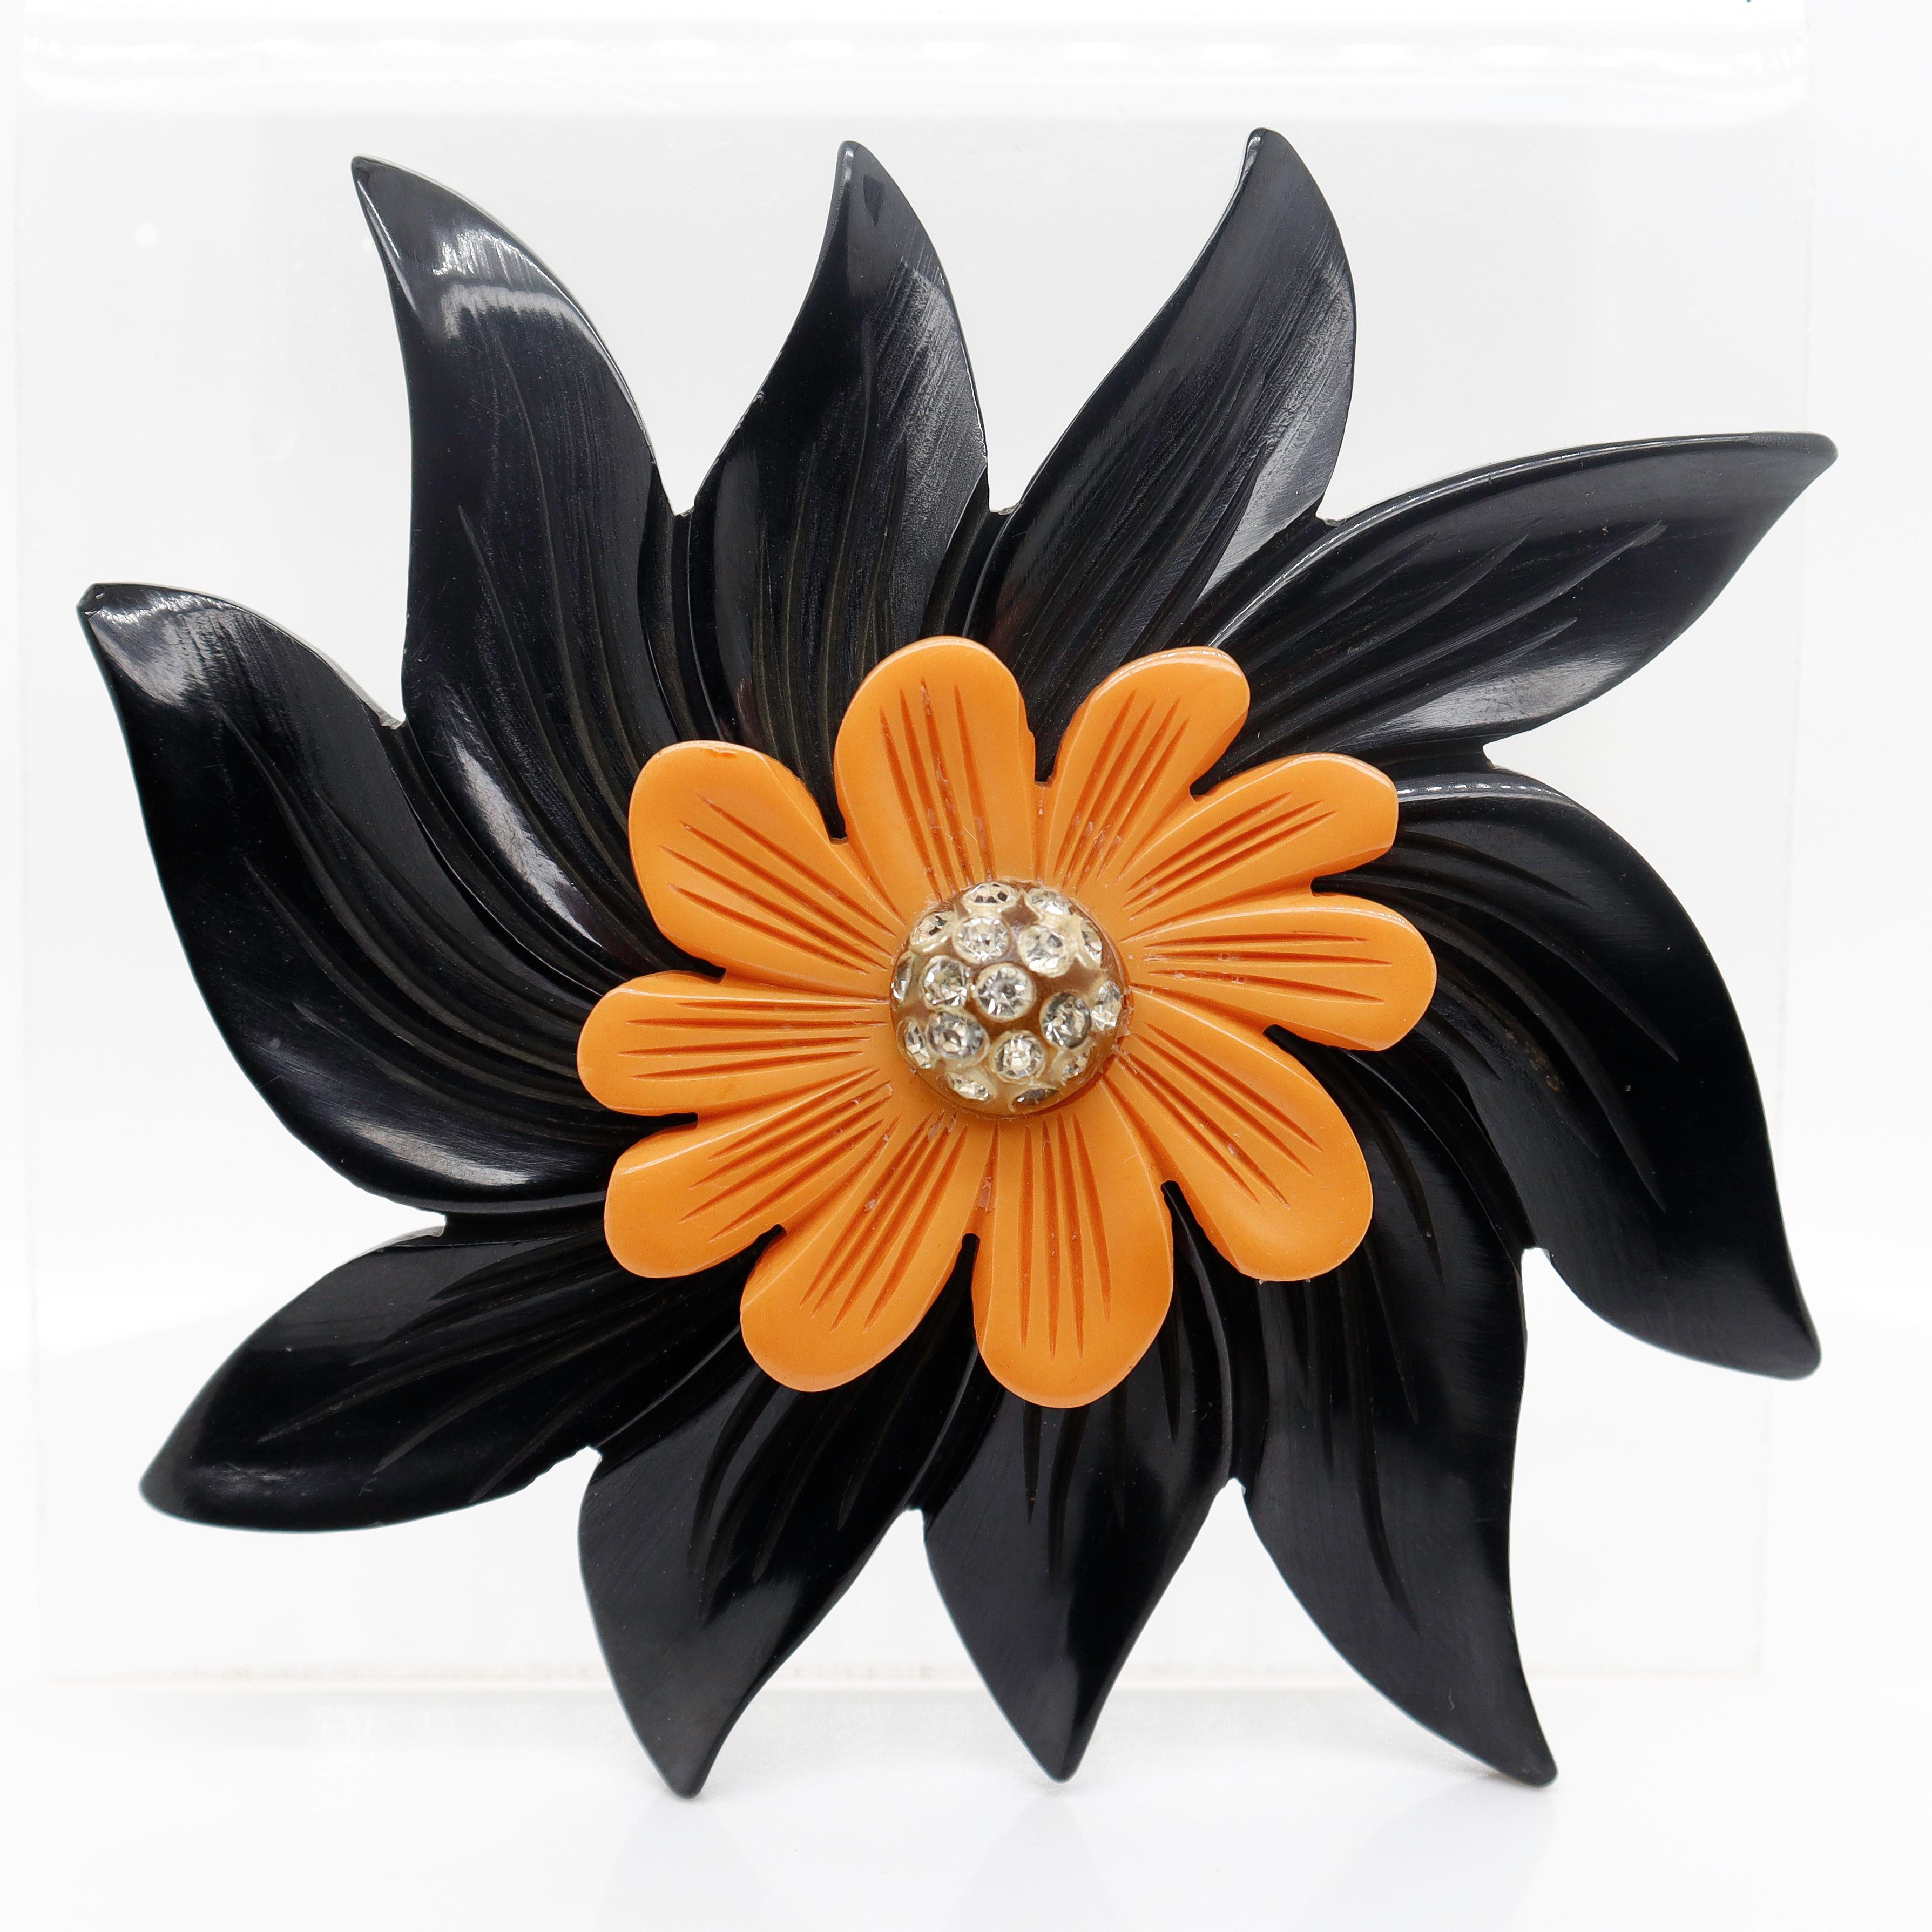 A fine vintage bakelite brooch or pin.

In the form of a flower with black and orange bakelite petals and a convex domed center with pave set rhinestones.

Simply a wonderful vintage brooch!

Date:
20th Century

Overall Condition:
It is in overall